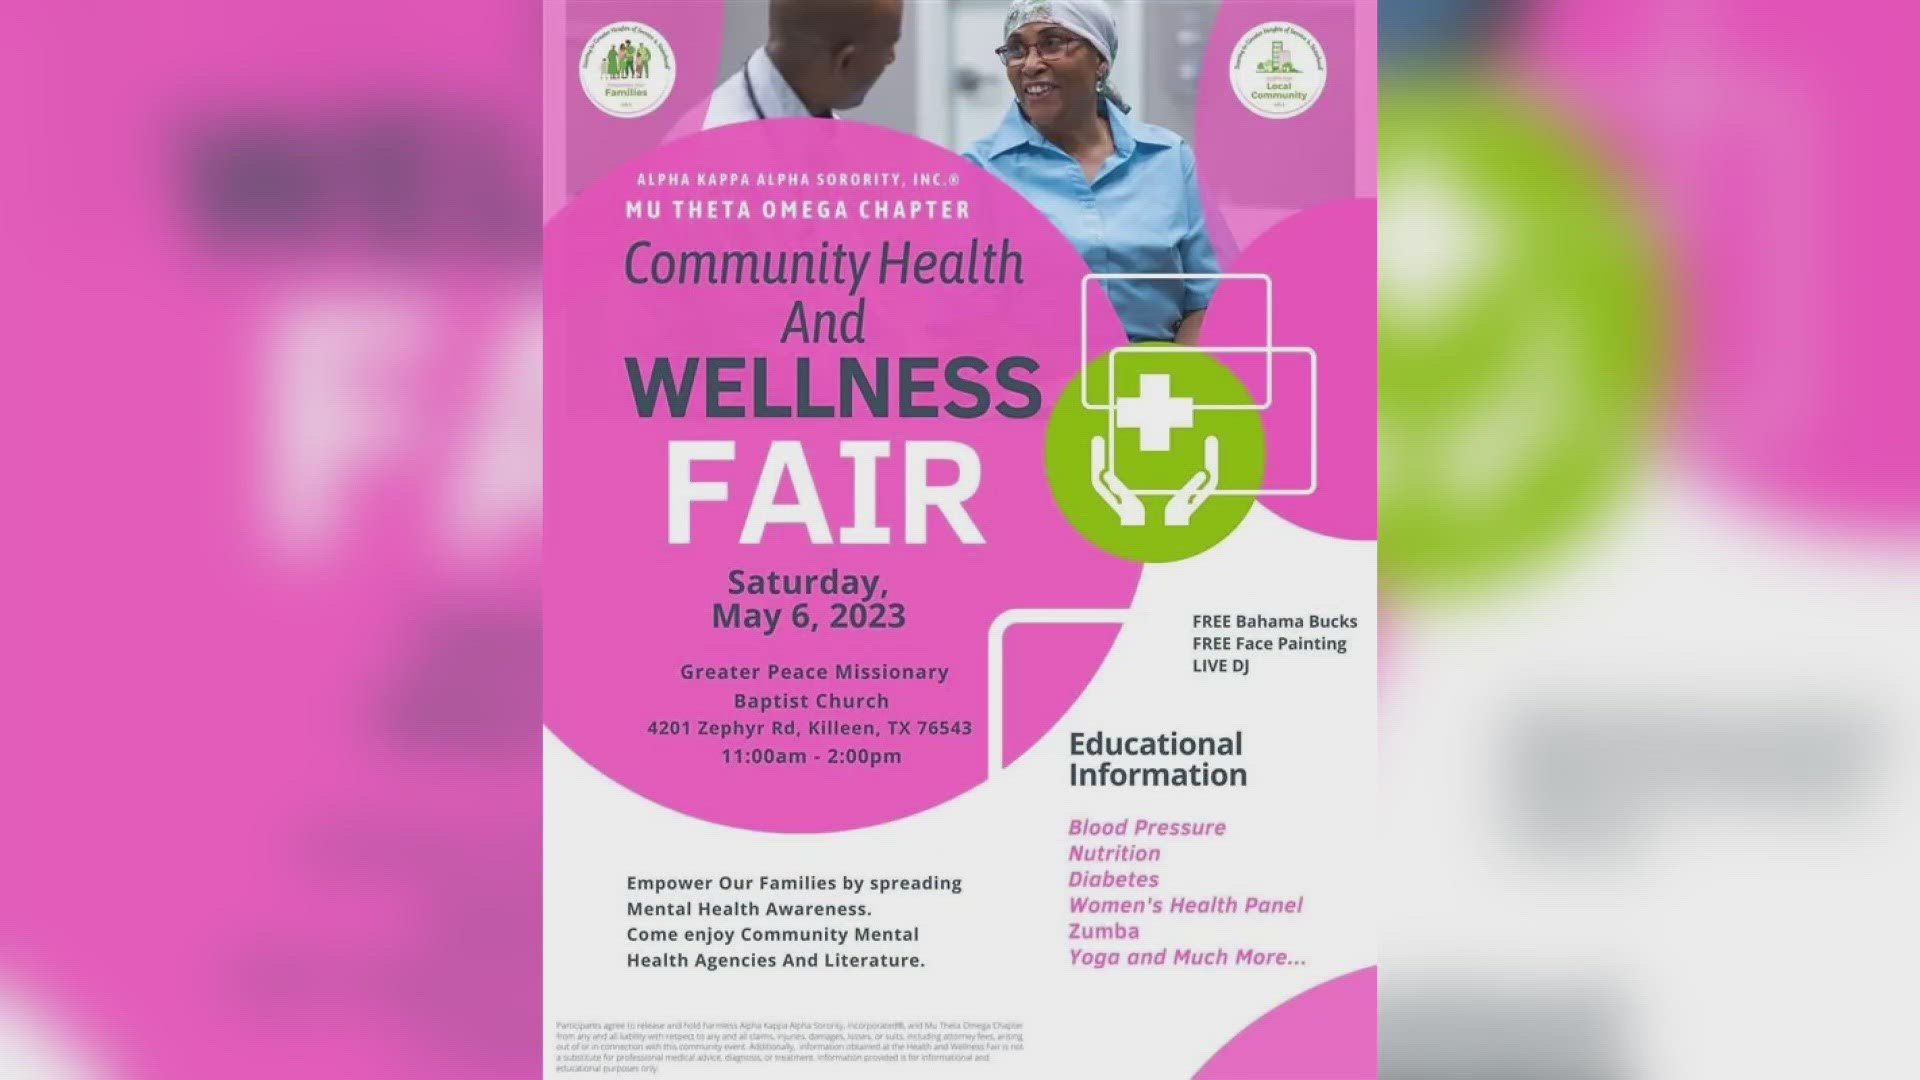 Alpha Kappa Alpha Sorority will host the event on Saturday, May 6, from 11-2 p.m.